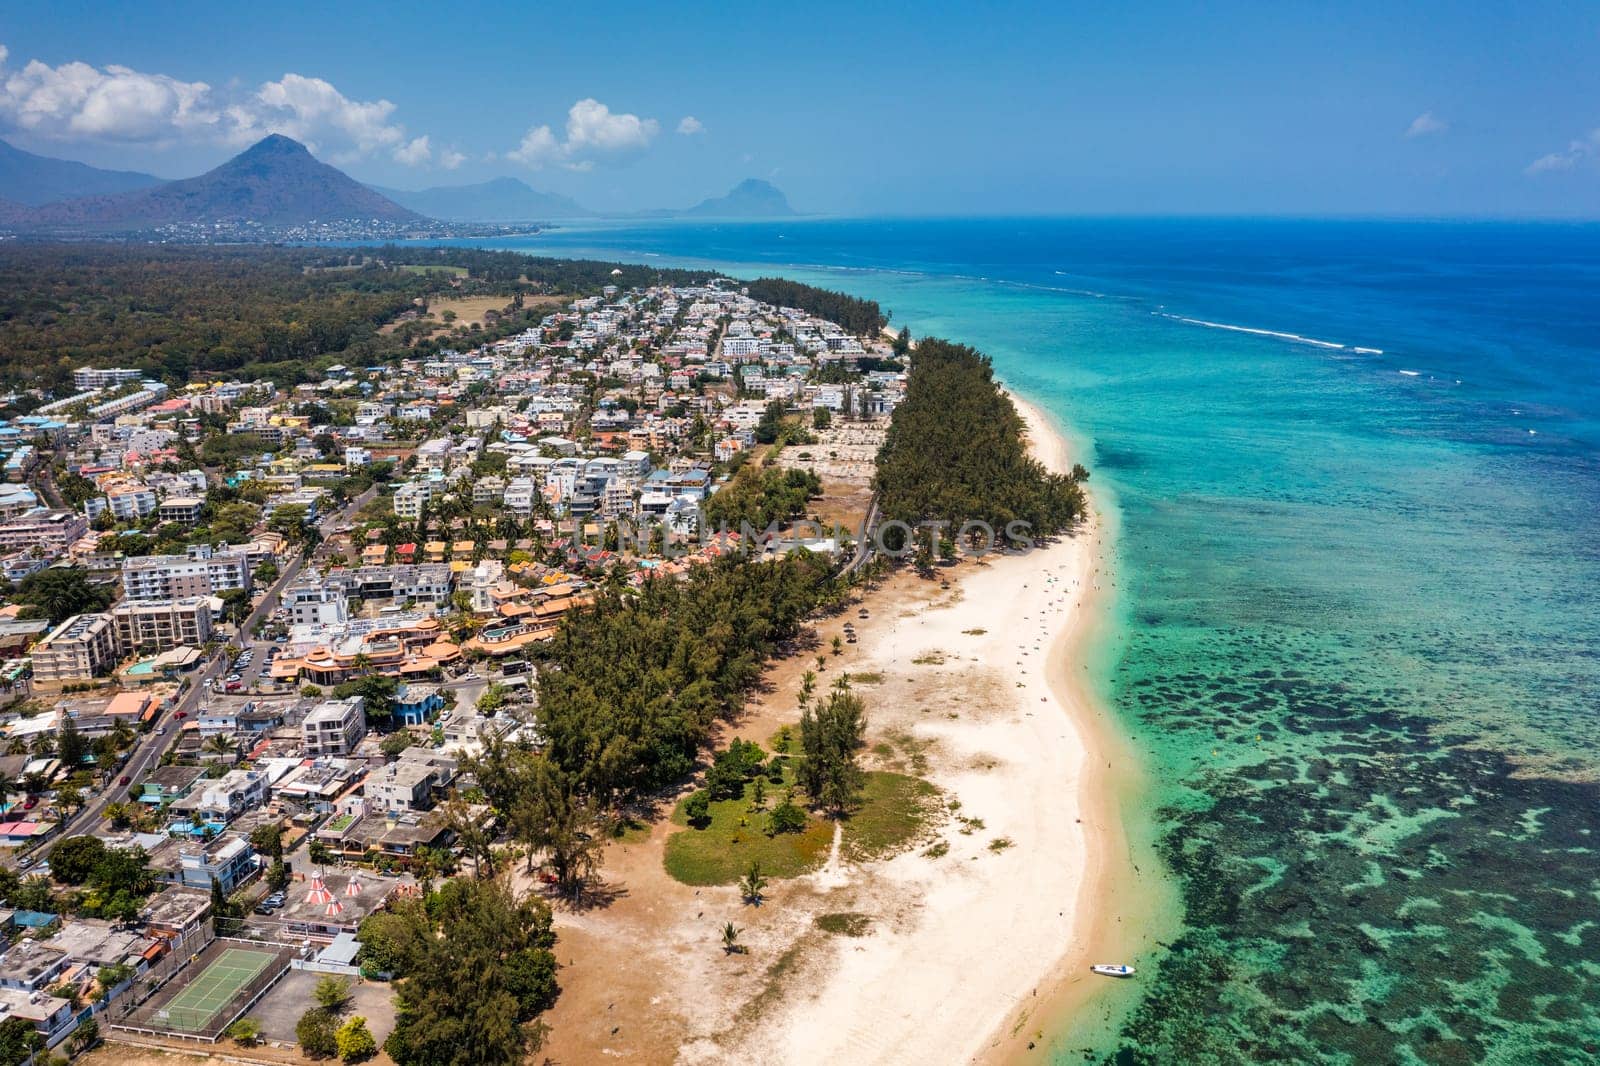 Beautiful Mauritius Island with gorgeous beach Flic en Flac, aerial view from drone. Mauritius, Black River, Flic-en-Flac view of oceanside village beach and luxurious hotel in summer. by DaLiu